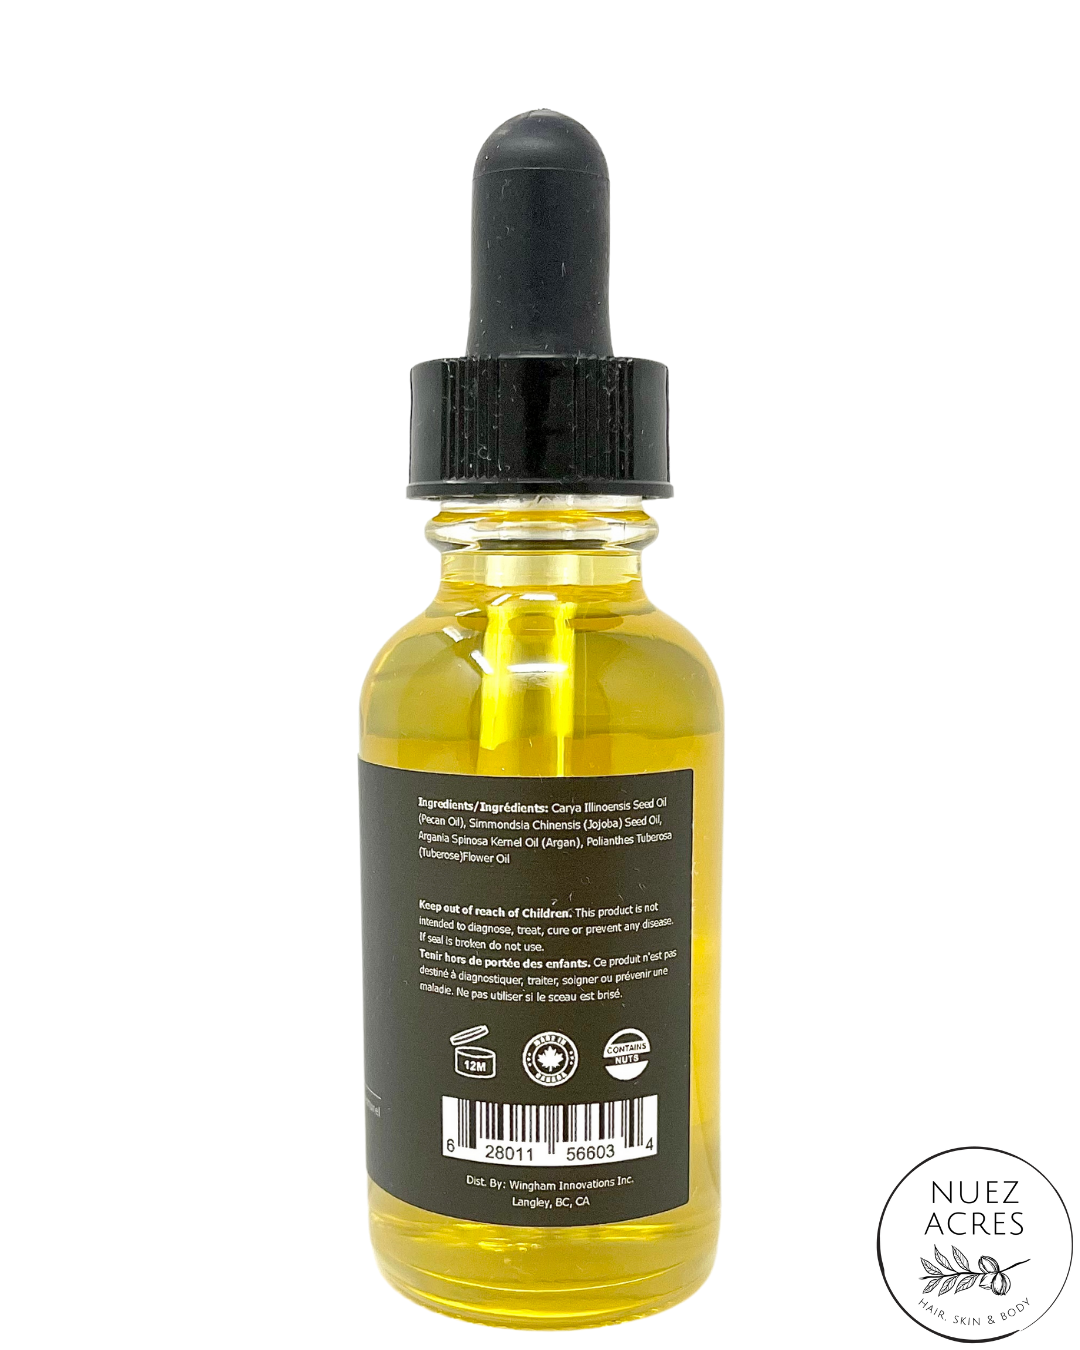 Nuez Acres Hydrating and Conditioning Beard Oil